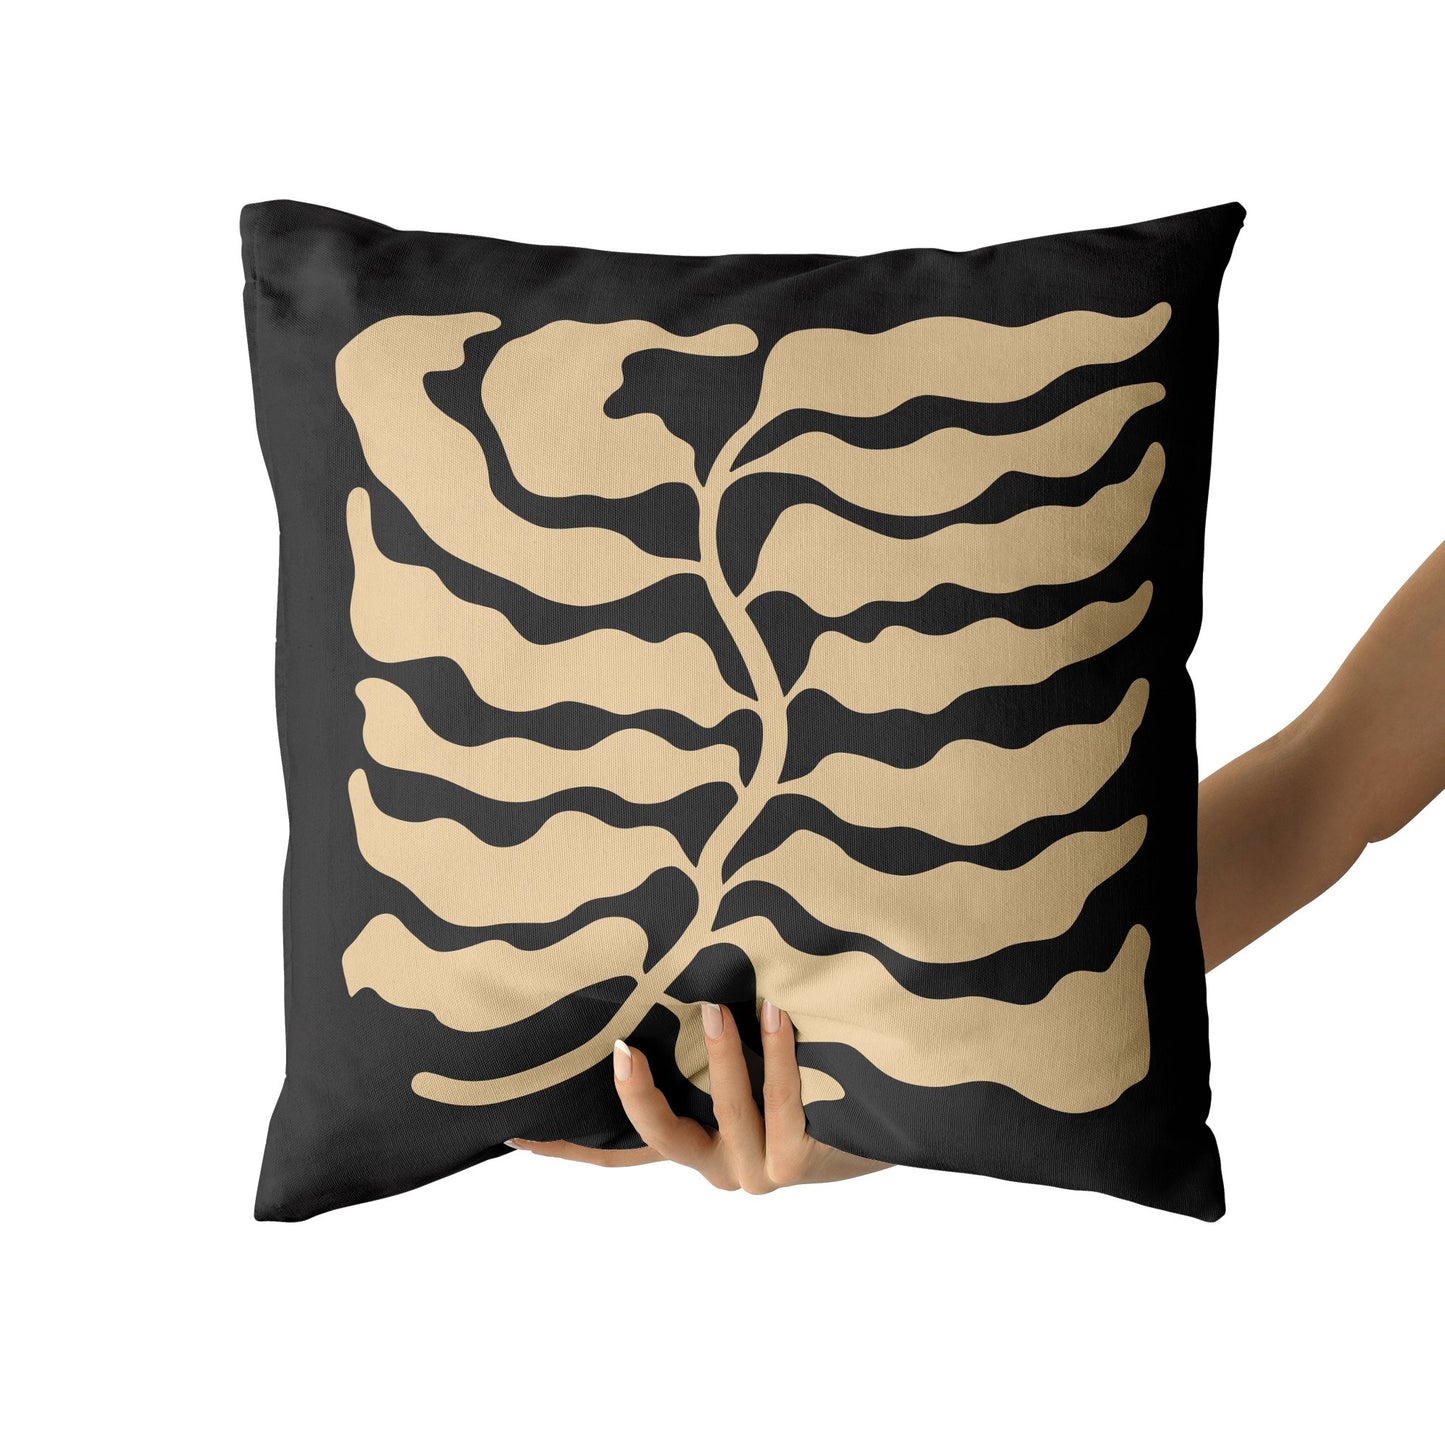 Pillow with Retro Leaf